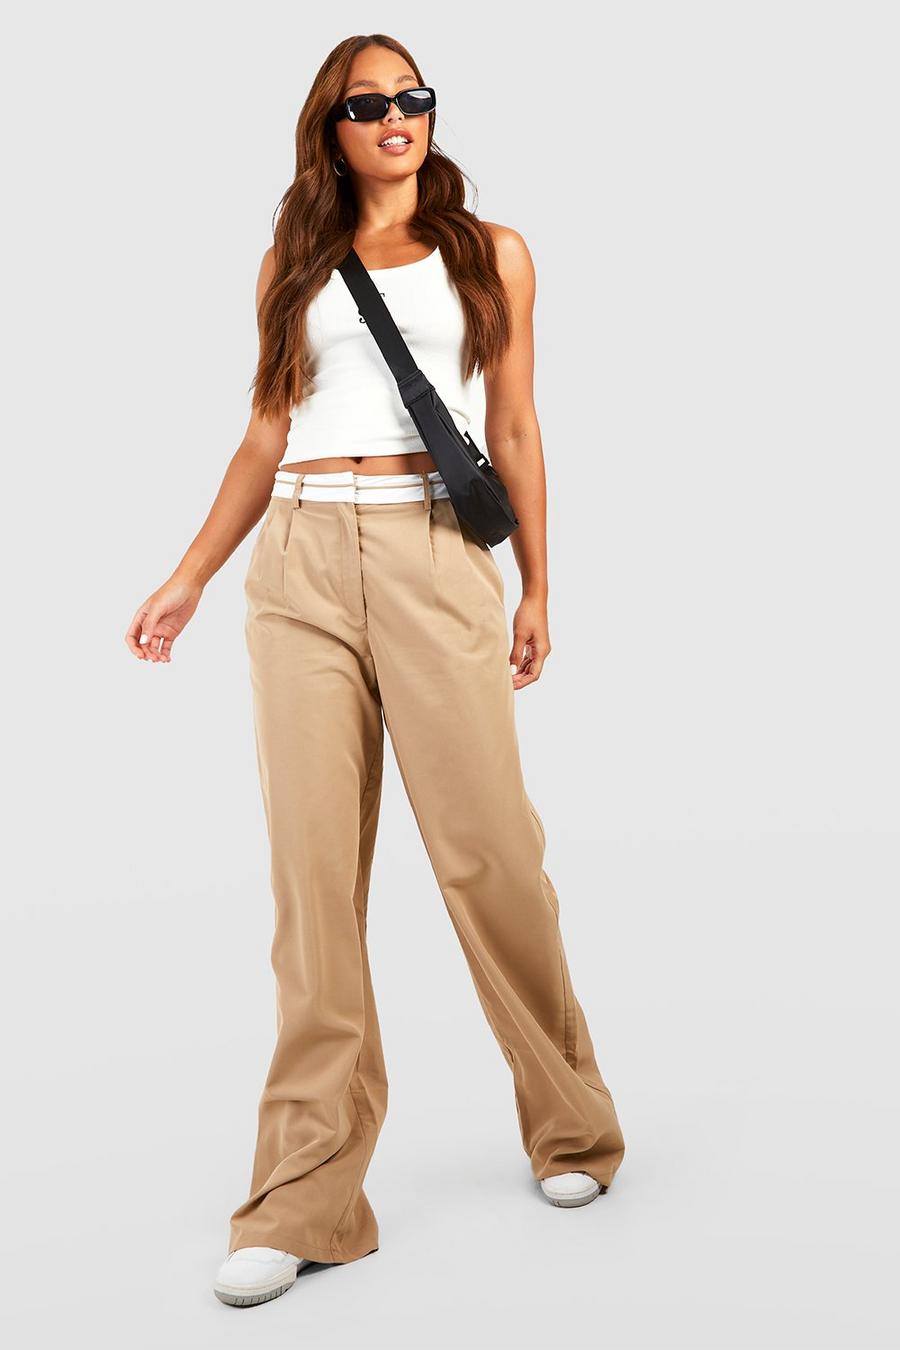 Tall Womens Trousers, Long Length Ladies Trousers